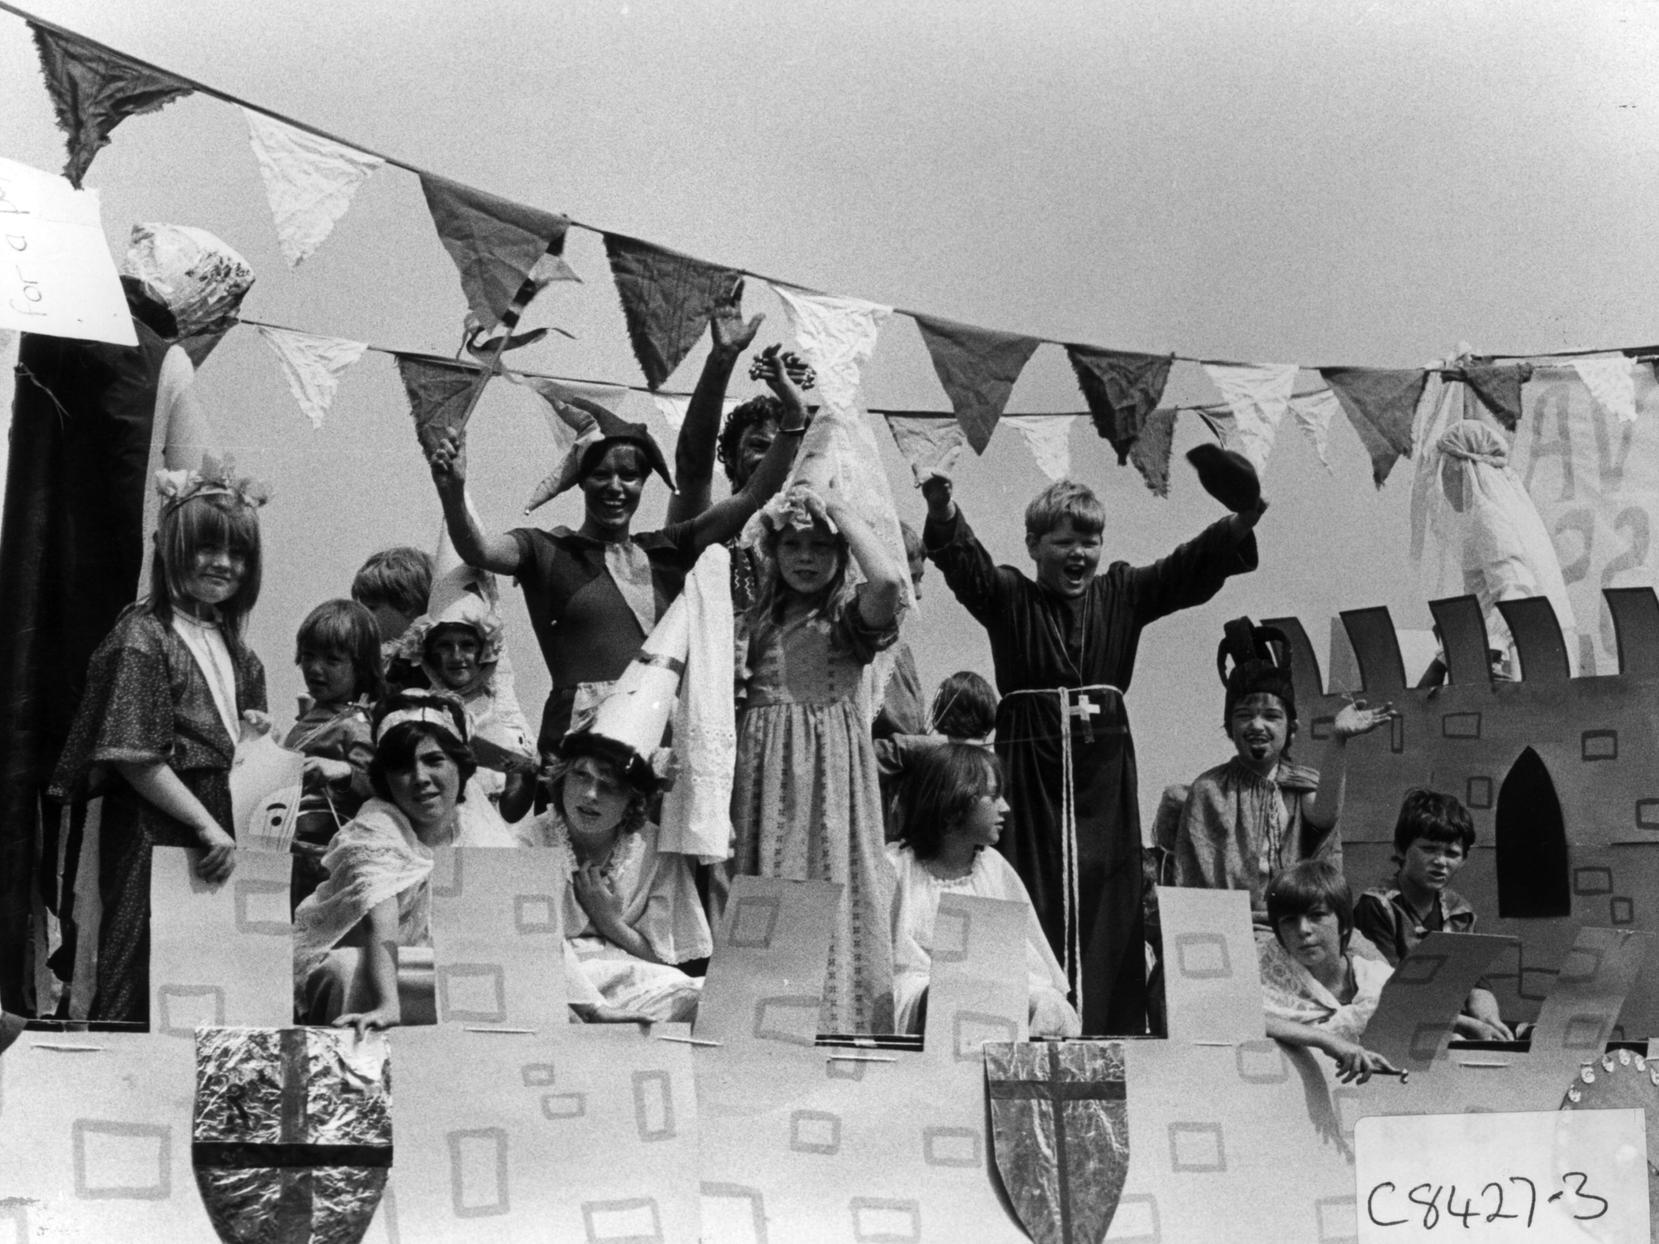 A float at Airedale Gala - taken between 1970 and 1990